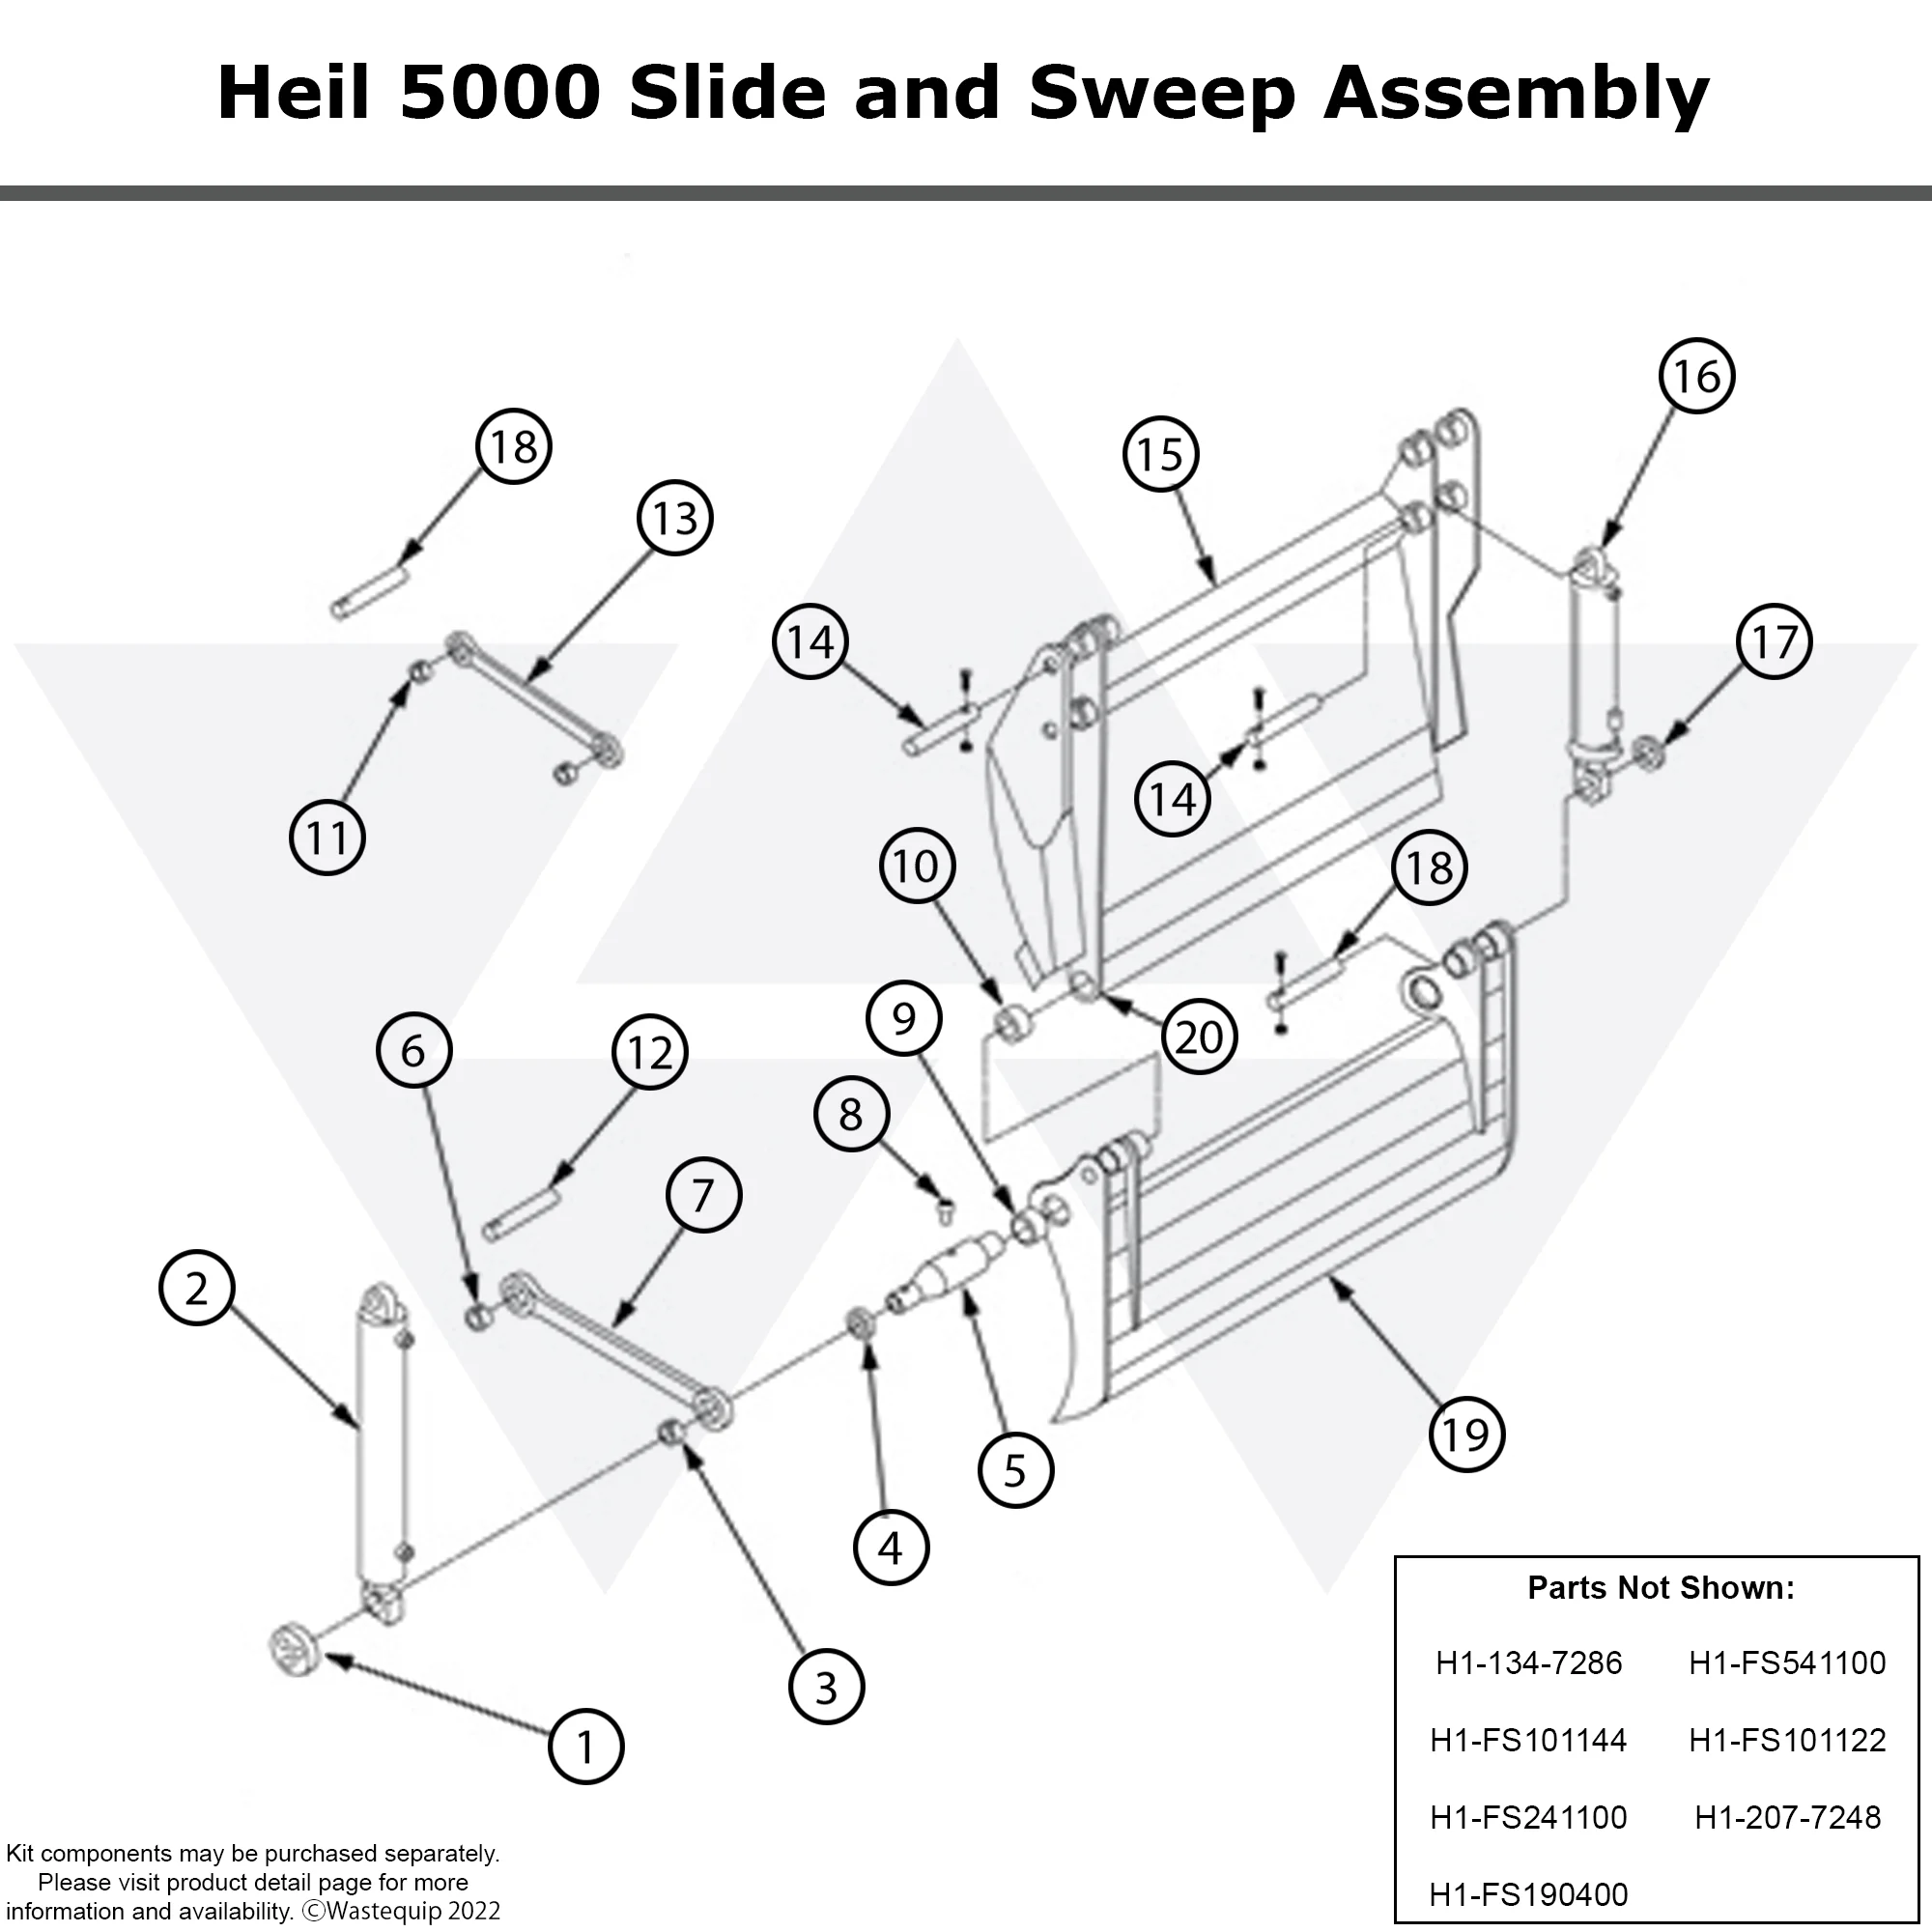 Wastebuilt® Replacement for Heil 5000 Slide and Sweep Parts